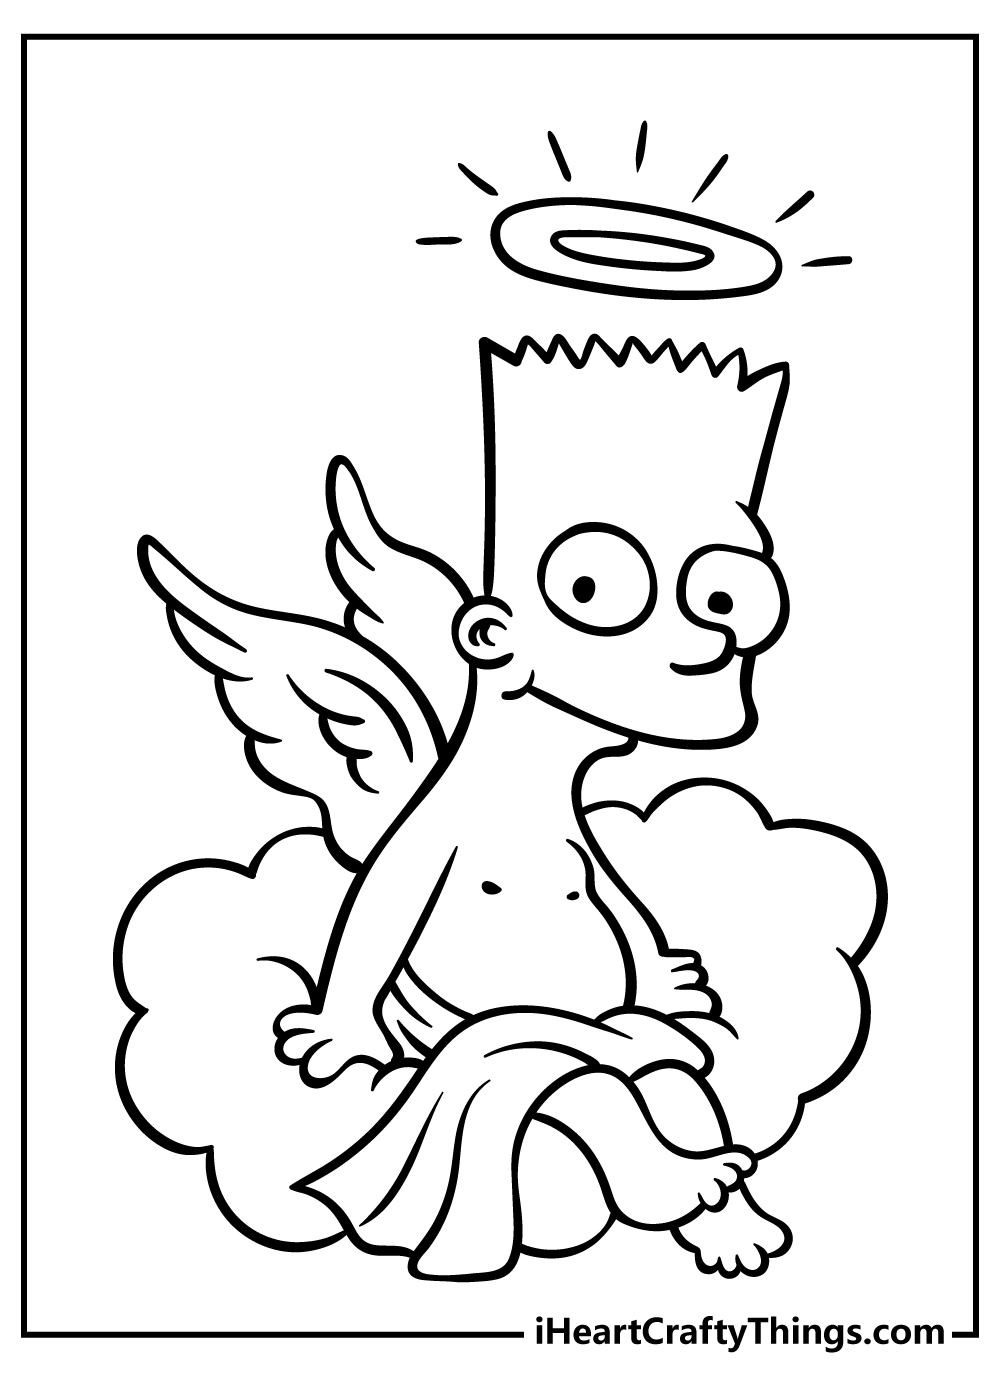 Simpsons Coloring Pages for kids free download